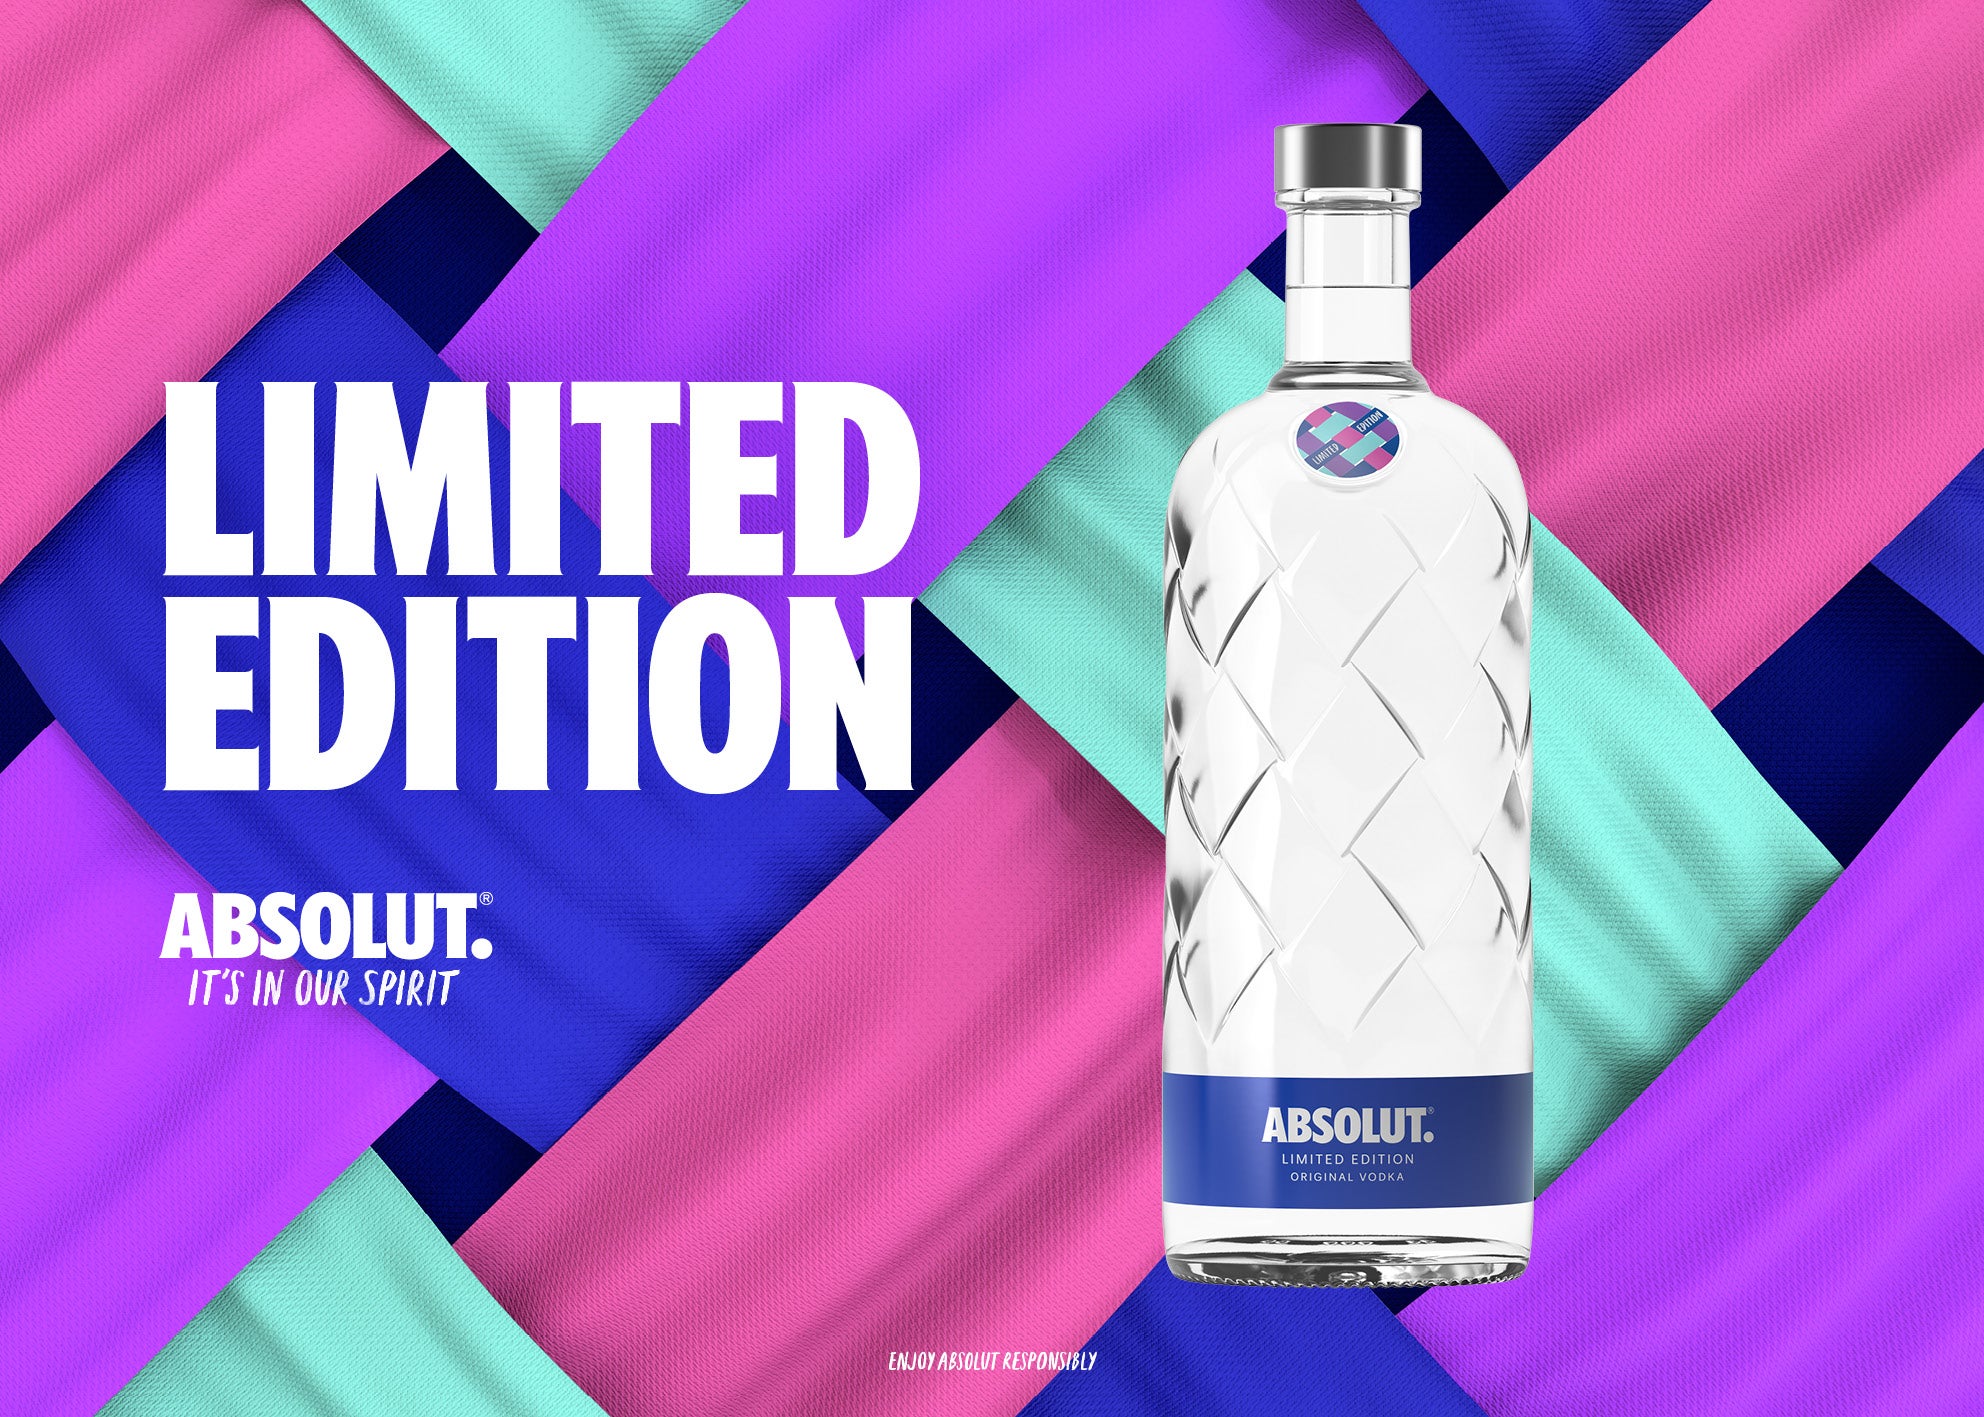 ABSOLUT VODKA LAUNCHES NEW LIMITED-EDITION BOTTLE CELEBRATING THE